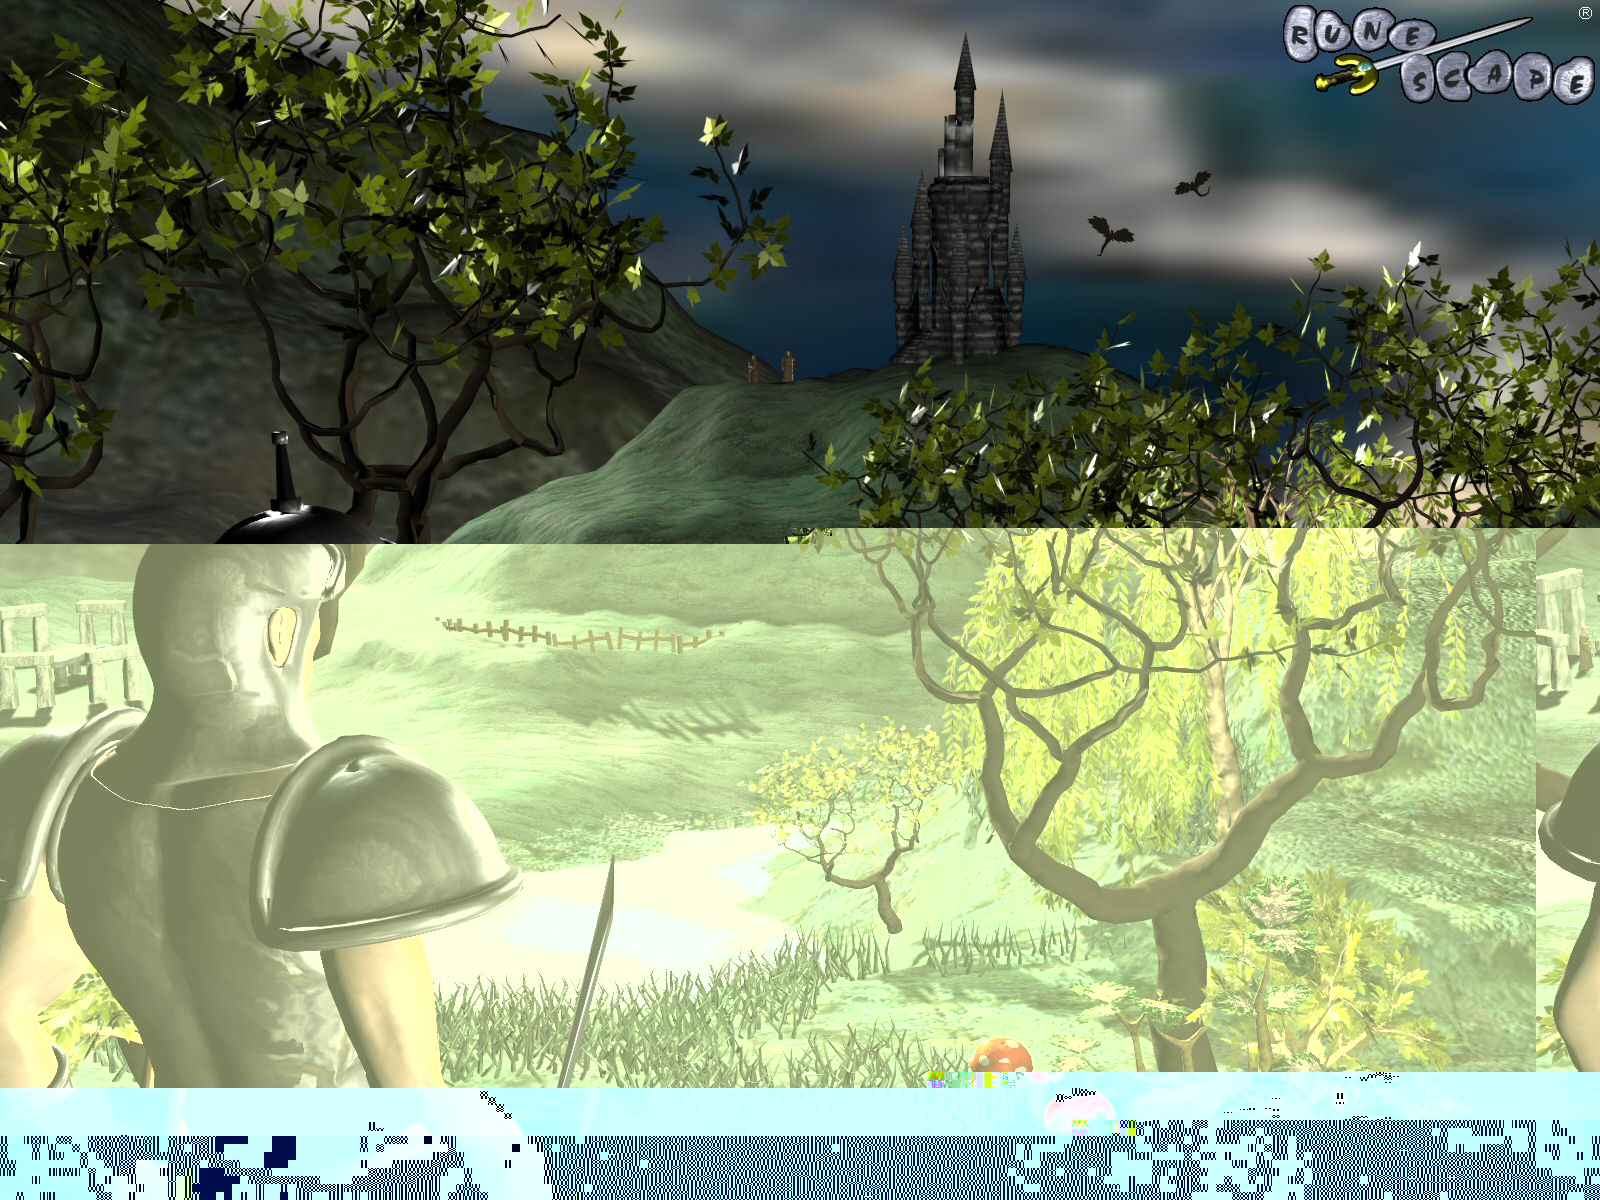 A CGI knight faces away from the viewer, looking at a distant brooding castle with dragons around it in the air. About halfway down the image, the colors become desaturated and the image “rolls” to the left slightly. At the bottom of the image it is almost entirely cyan and black and very pixelated.